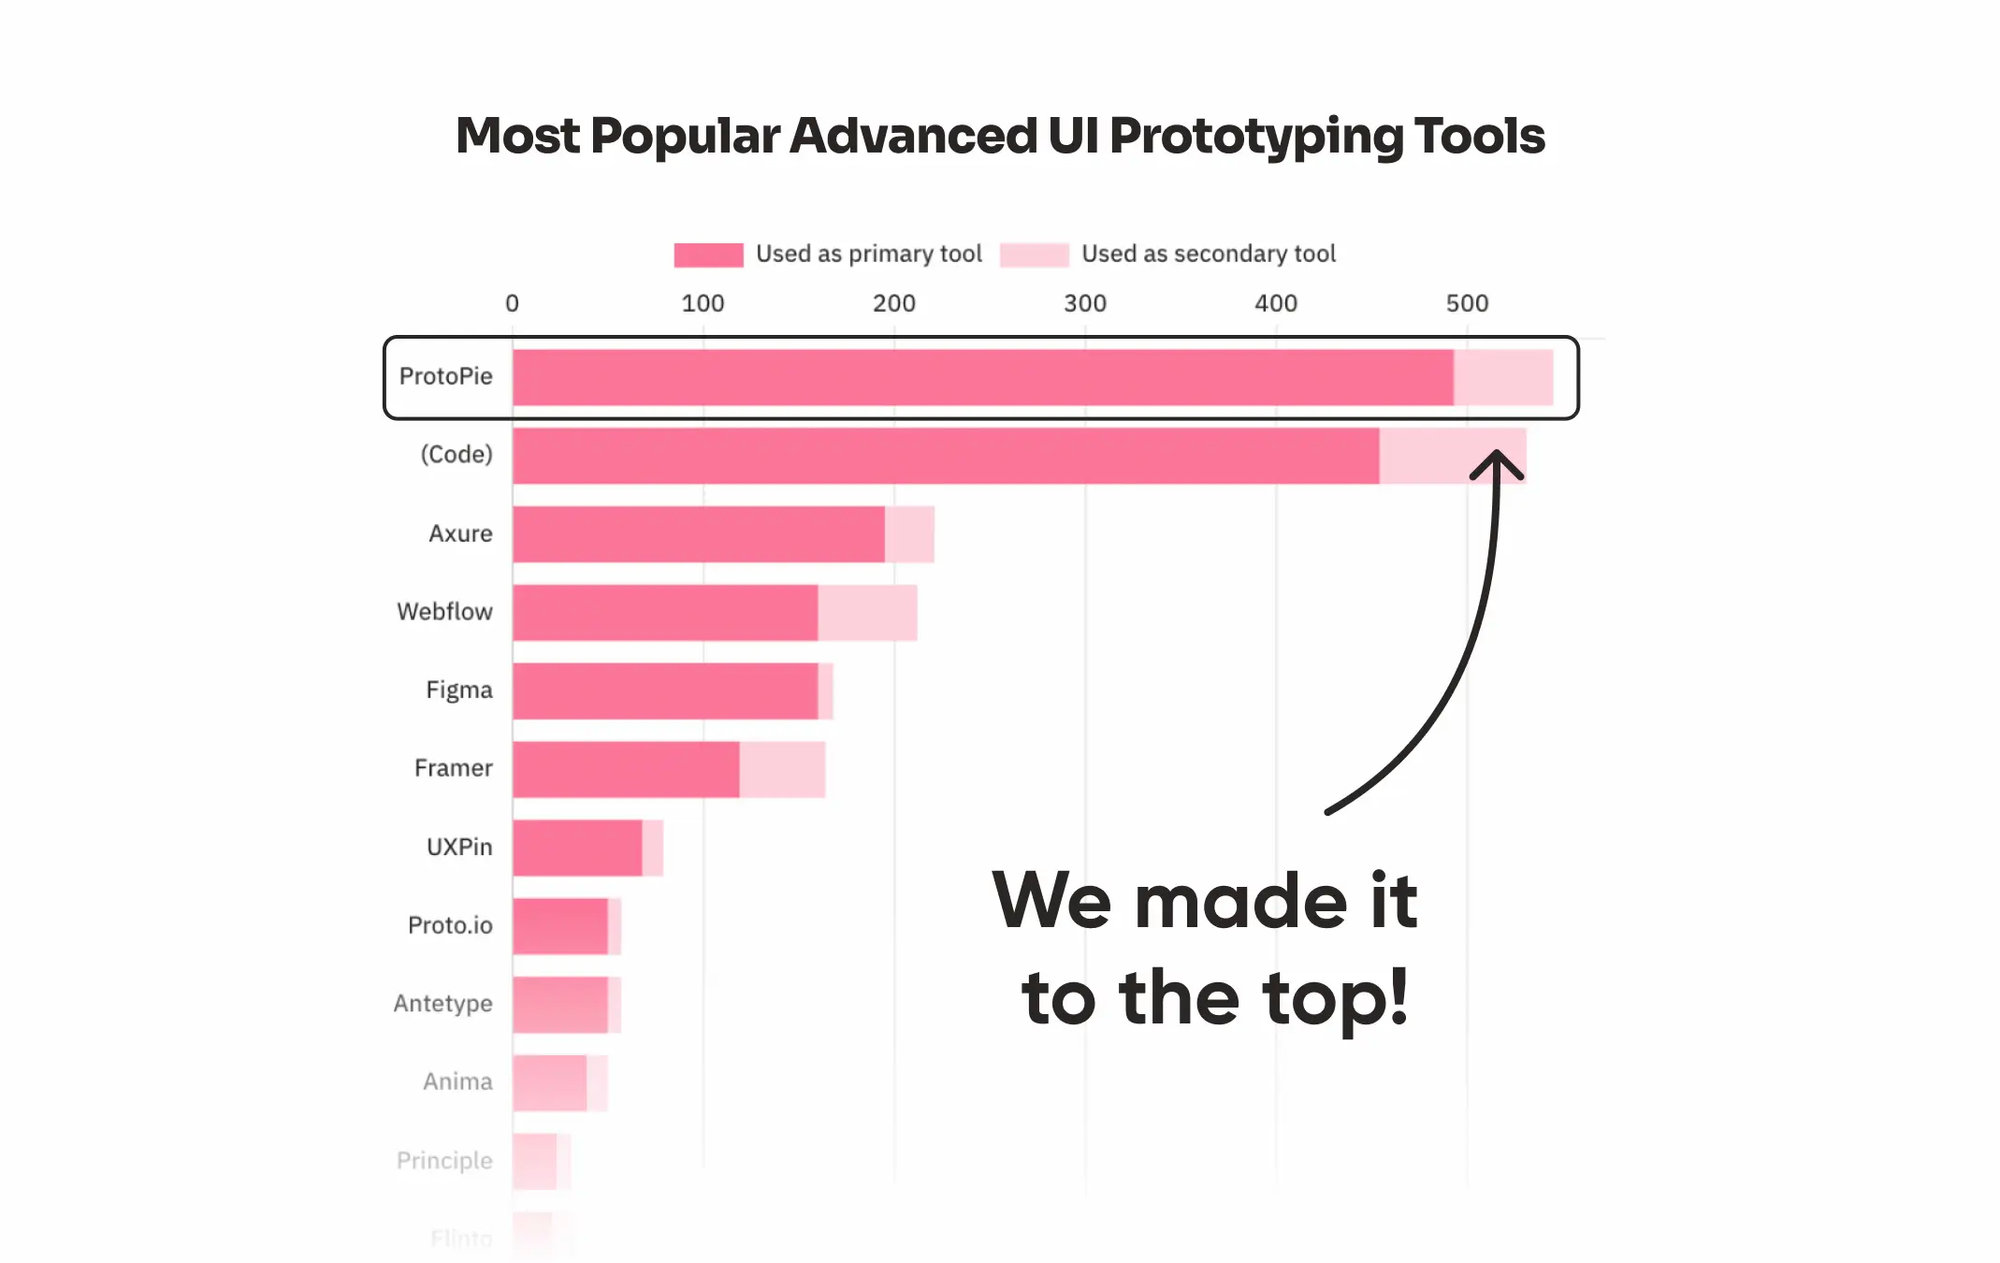 ProtoPie tops the list of popular tools for advanced prototyping.